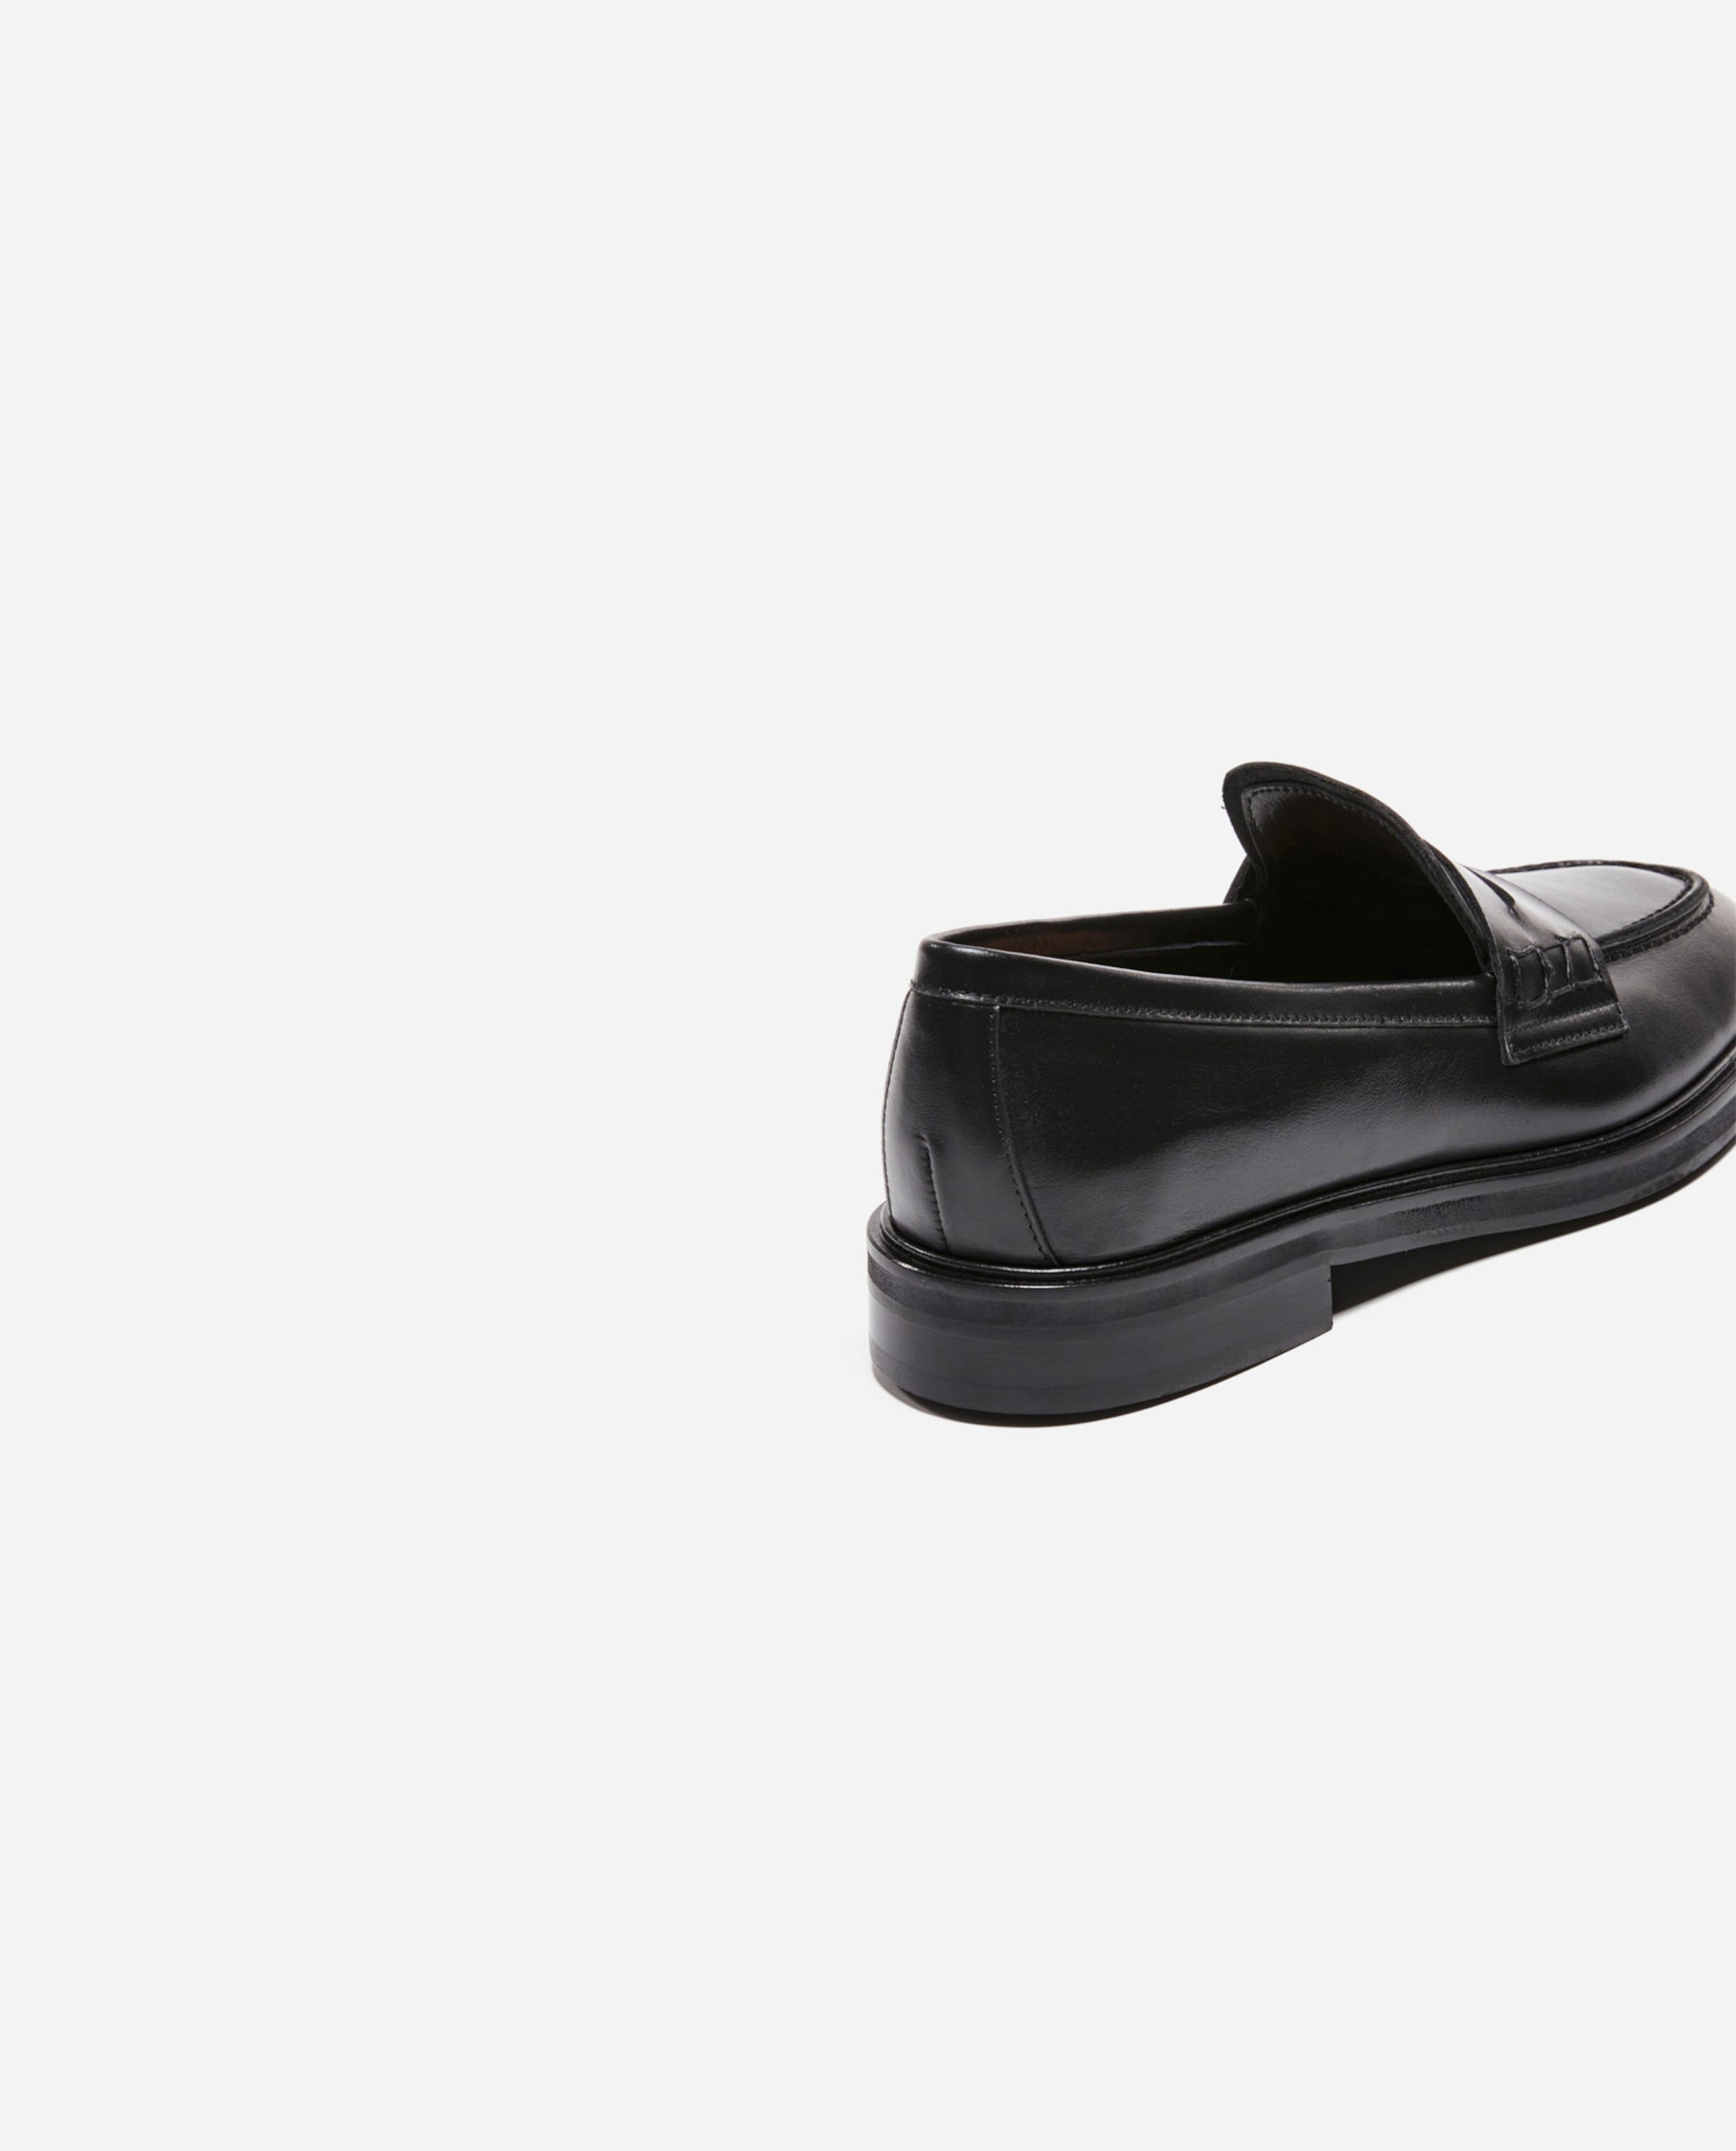 Sara Black Leather Loafers 21010115601-001 - 6